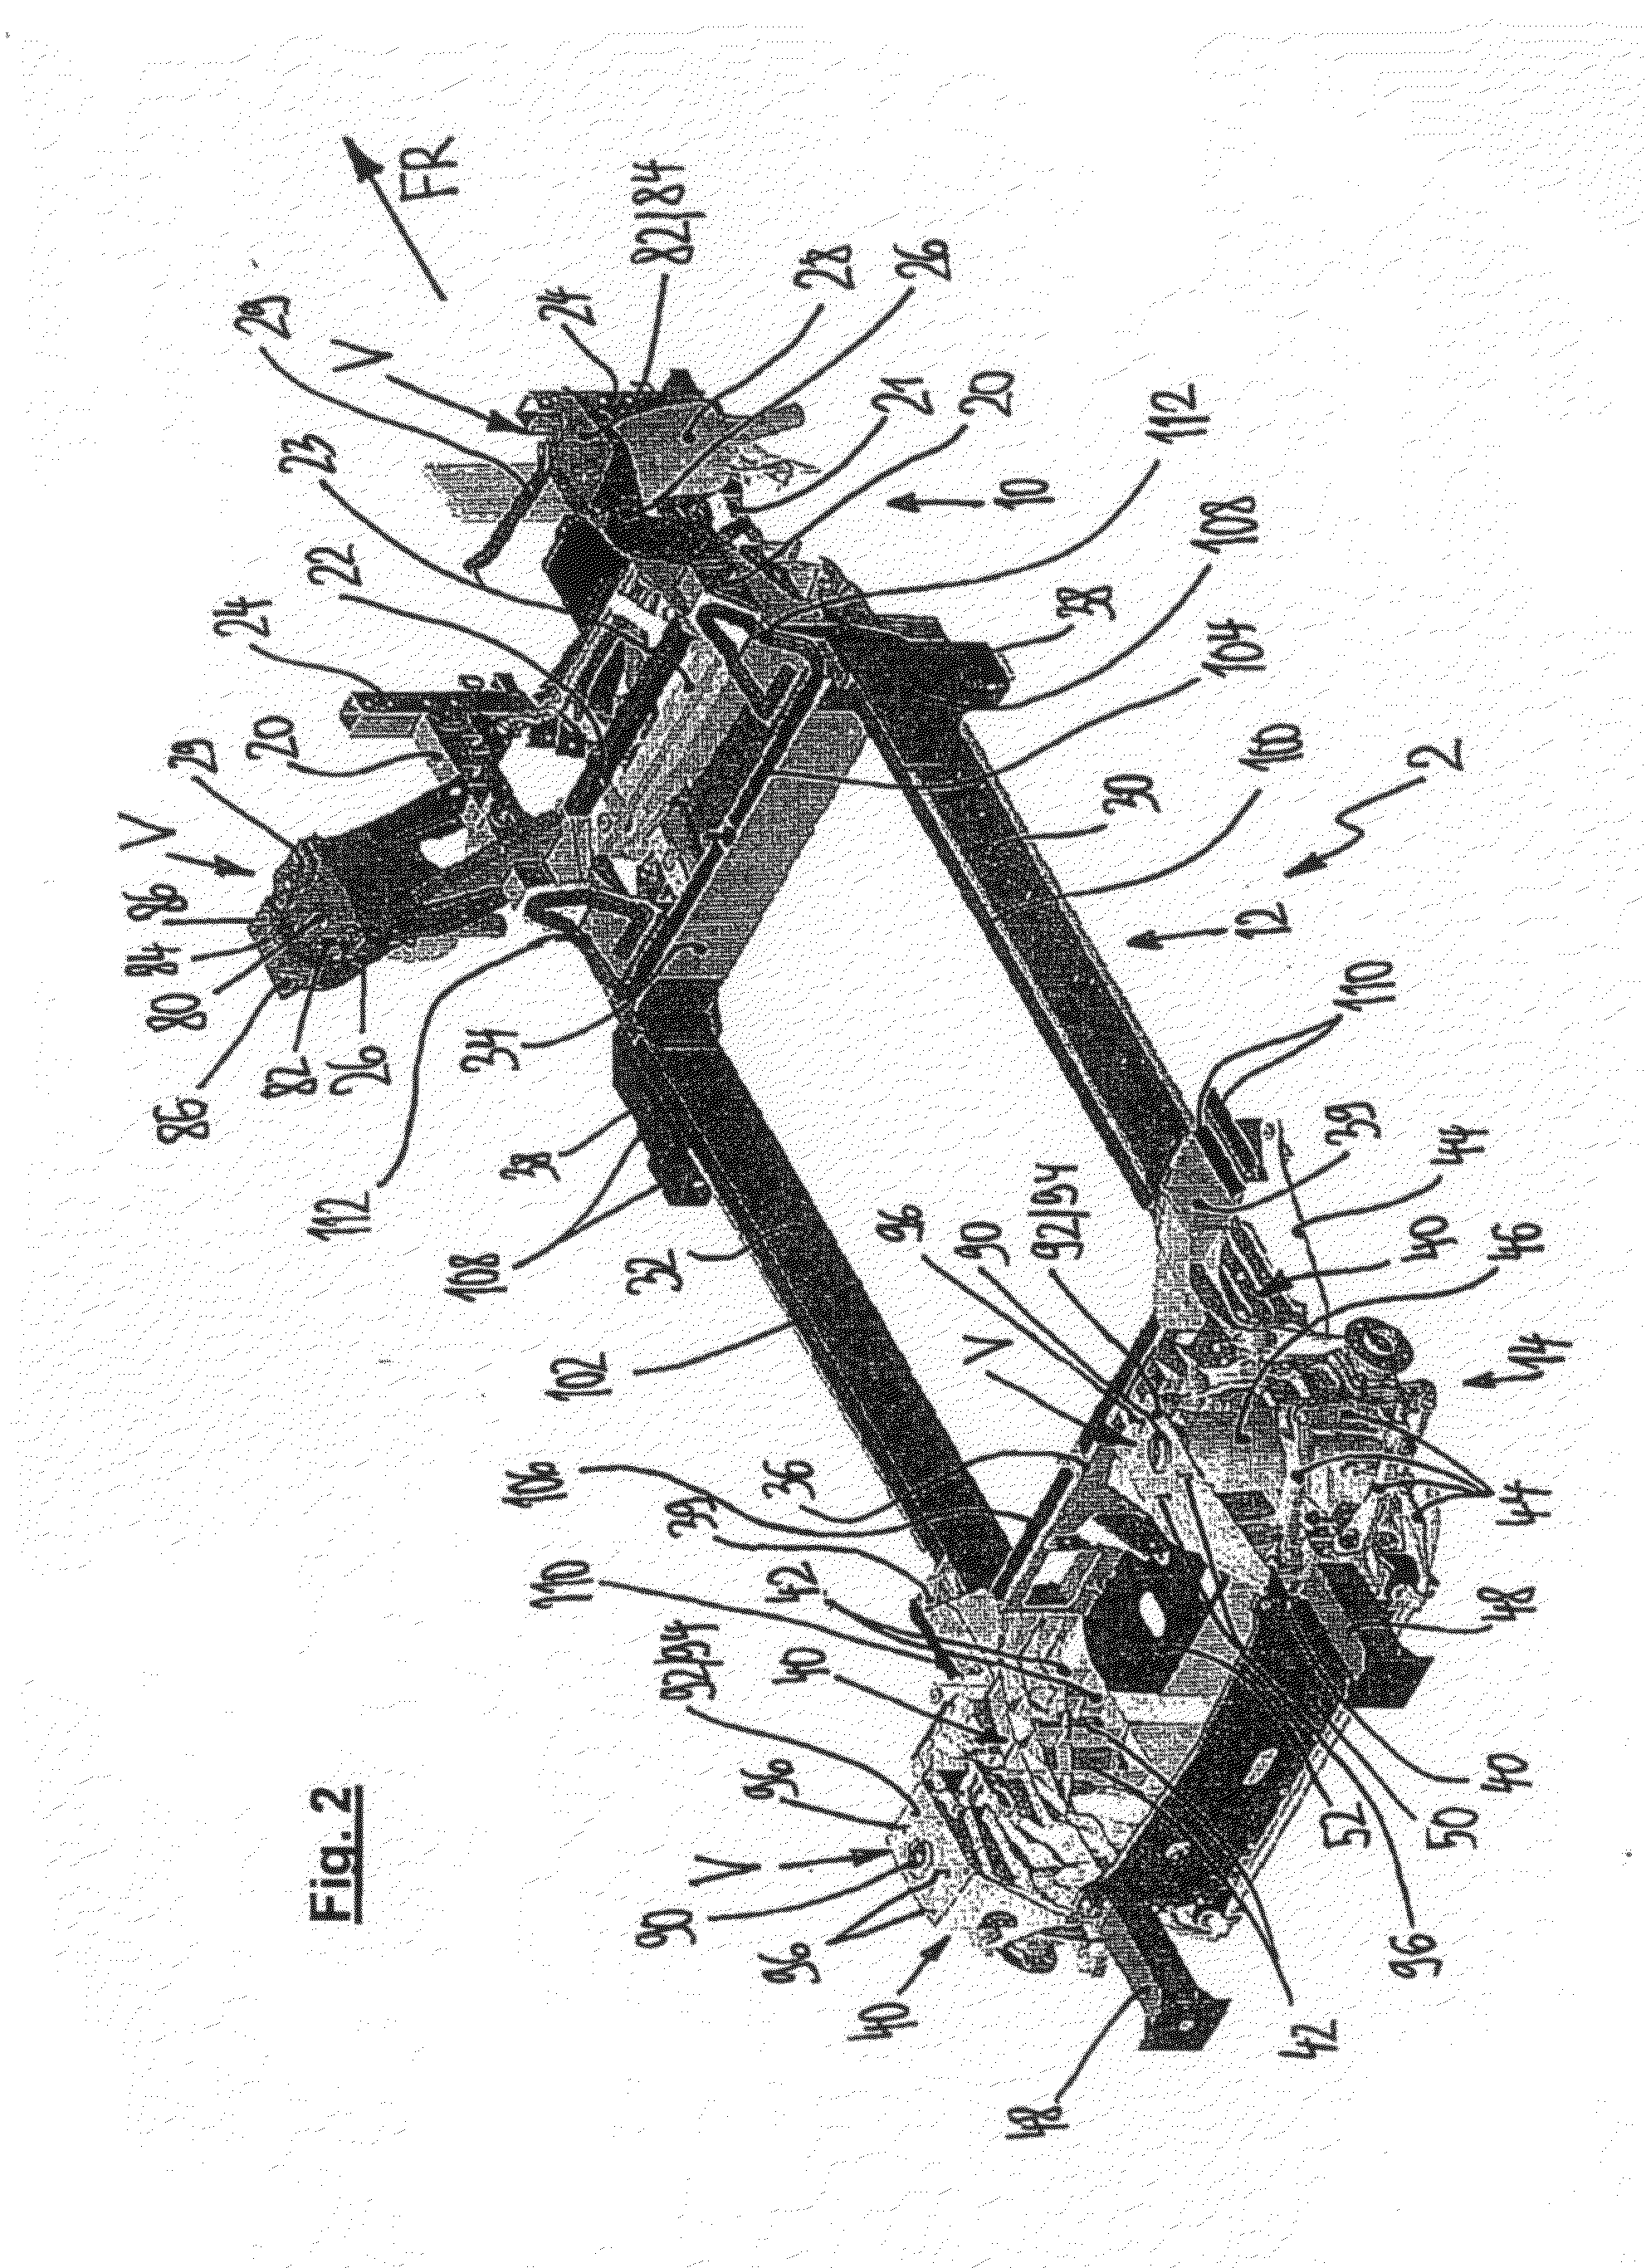 Motor Vehicle Having a Chassis Frame and a Vehicle Body